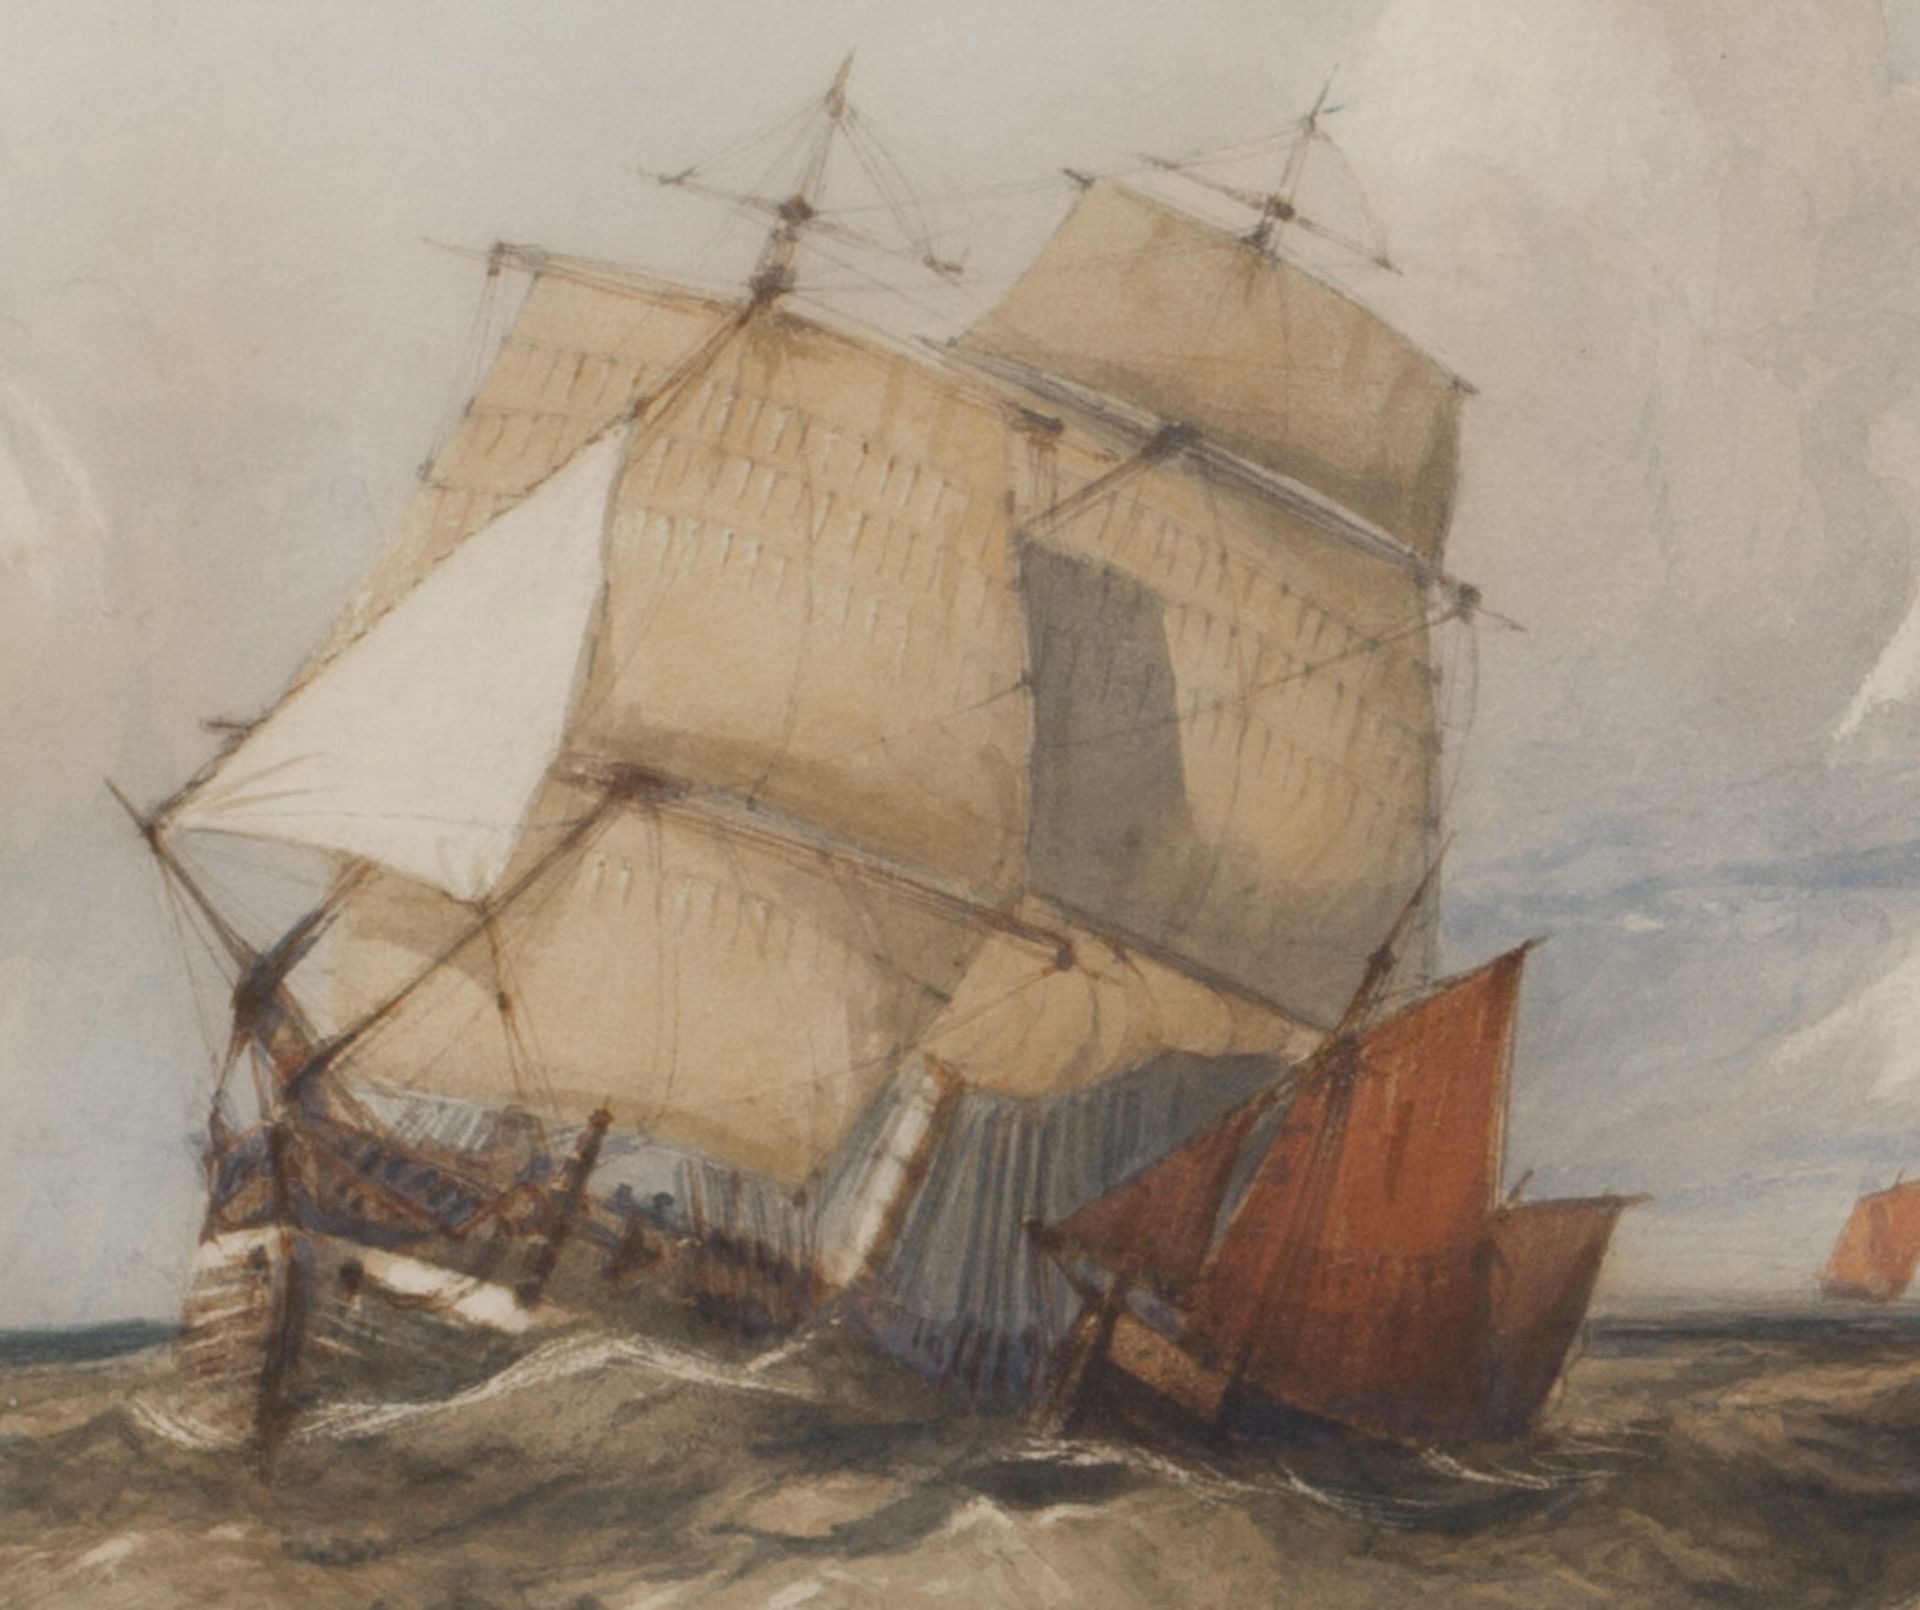 Original Charles Bentley 'ships In Rough Seas' Watercolour Early 19Th C. - Image 3 of 8